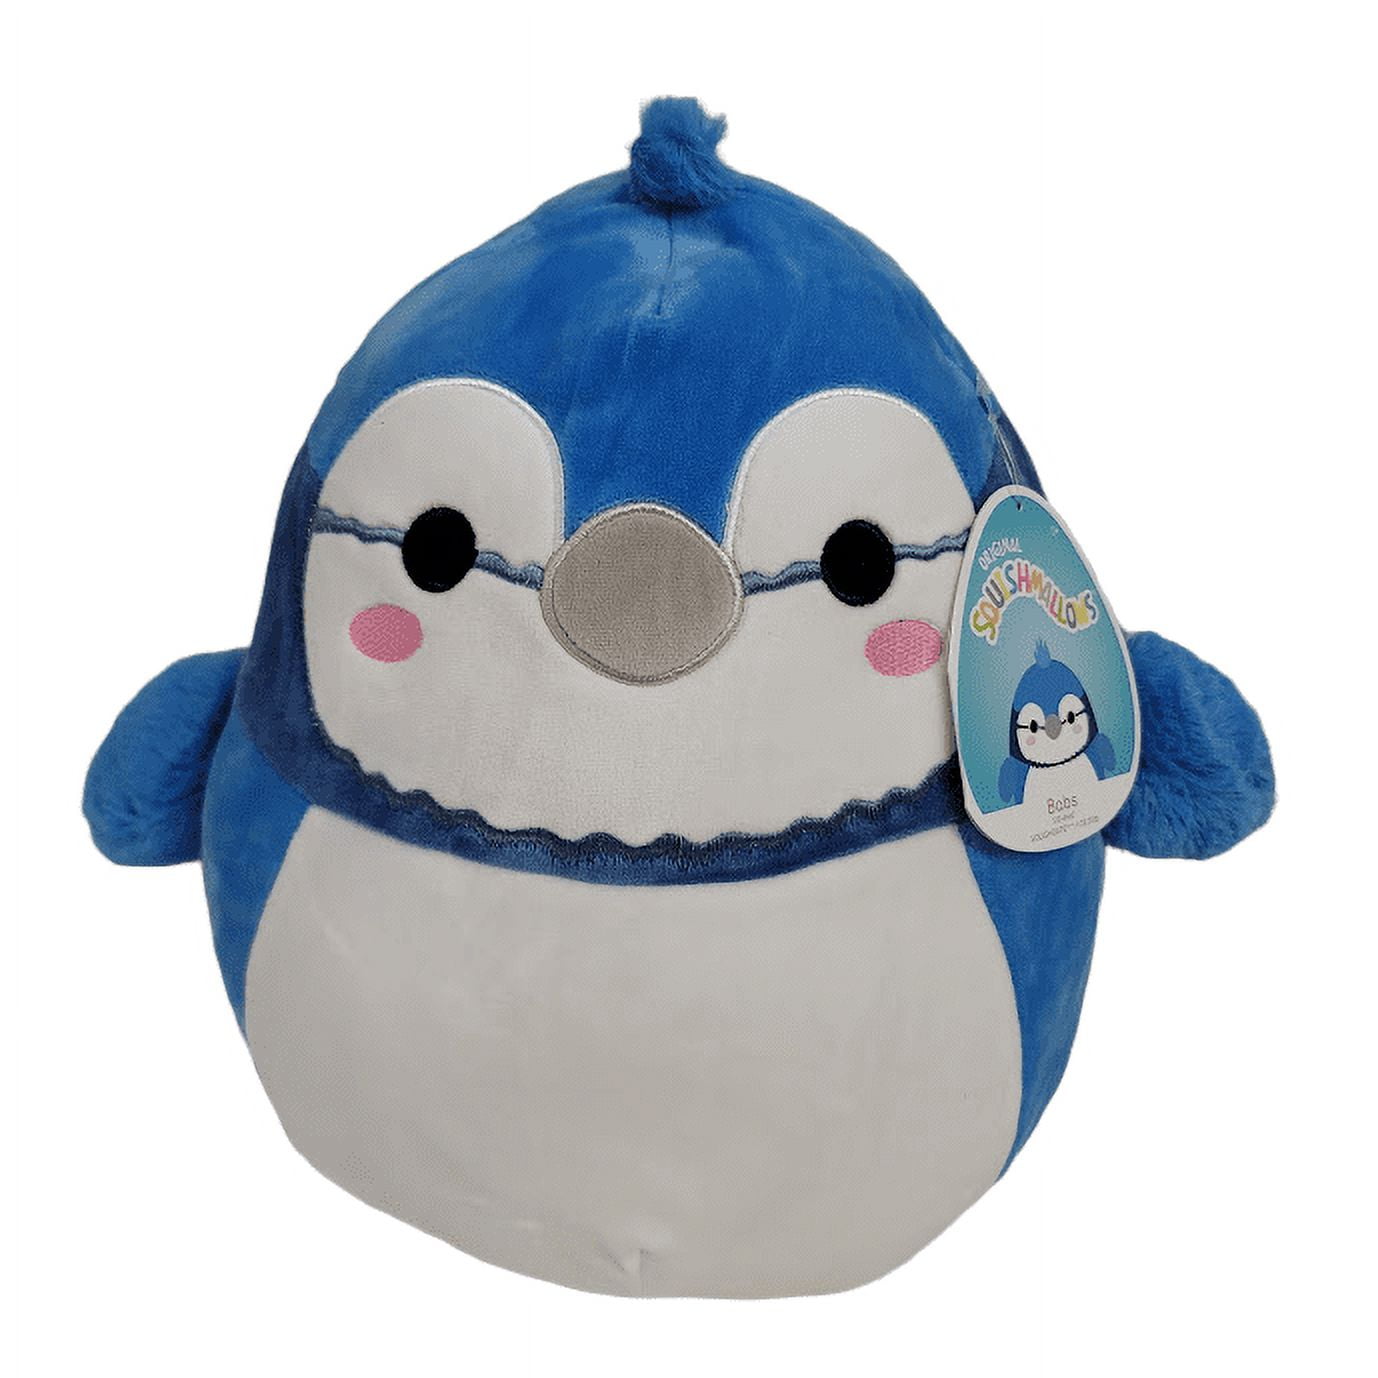  Squishmallows Original 14-Inch Babs Blue Jay with Fuzzy Wings -  Large Ultrasoft Official Jazwares Plush : Toys & Games